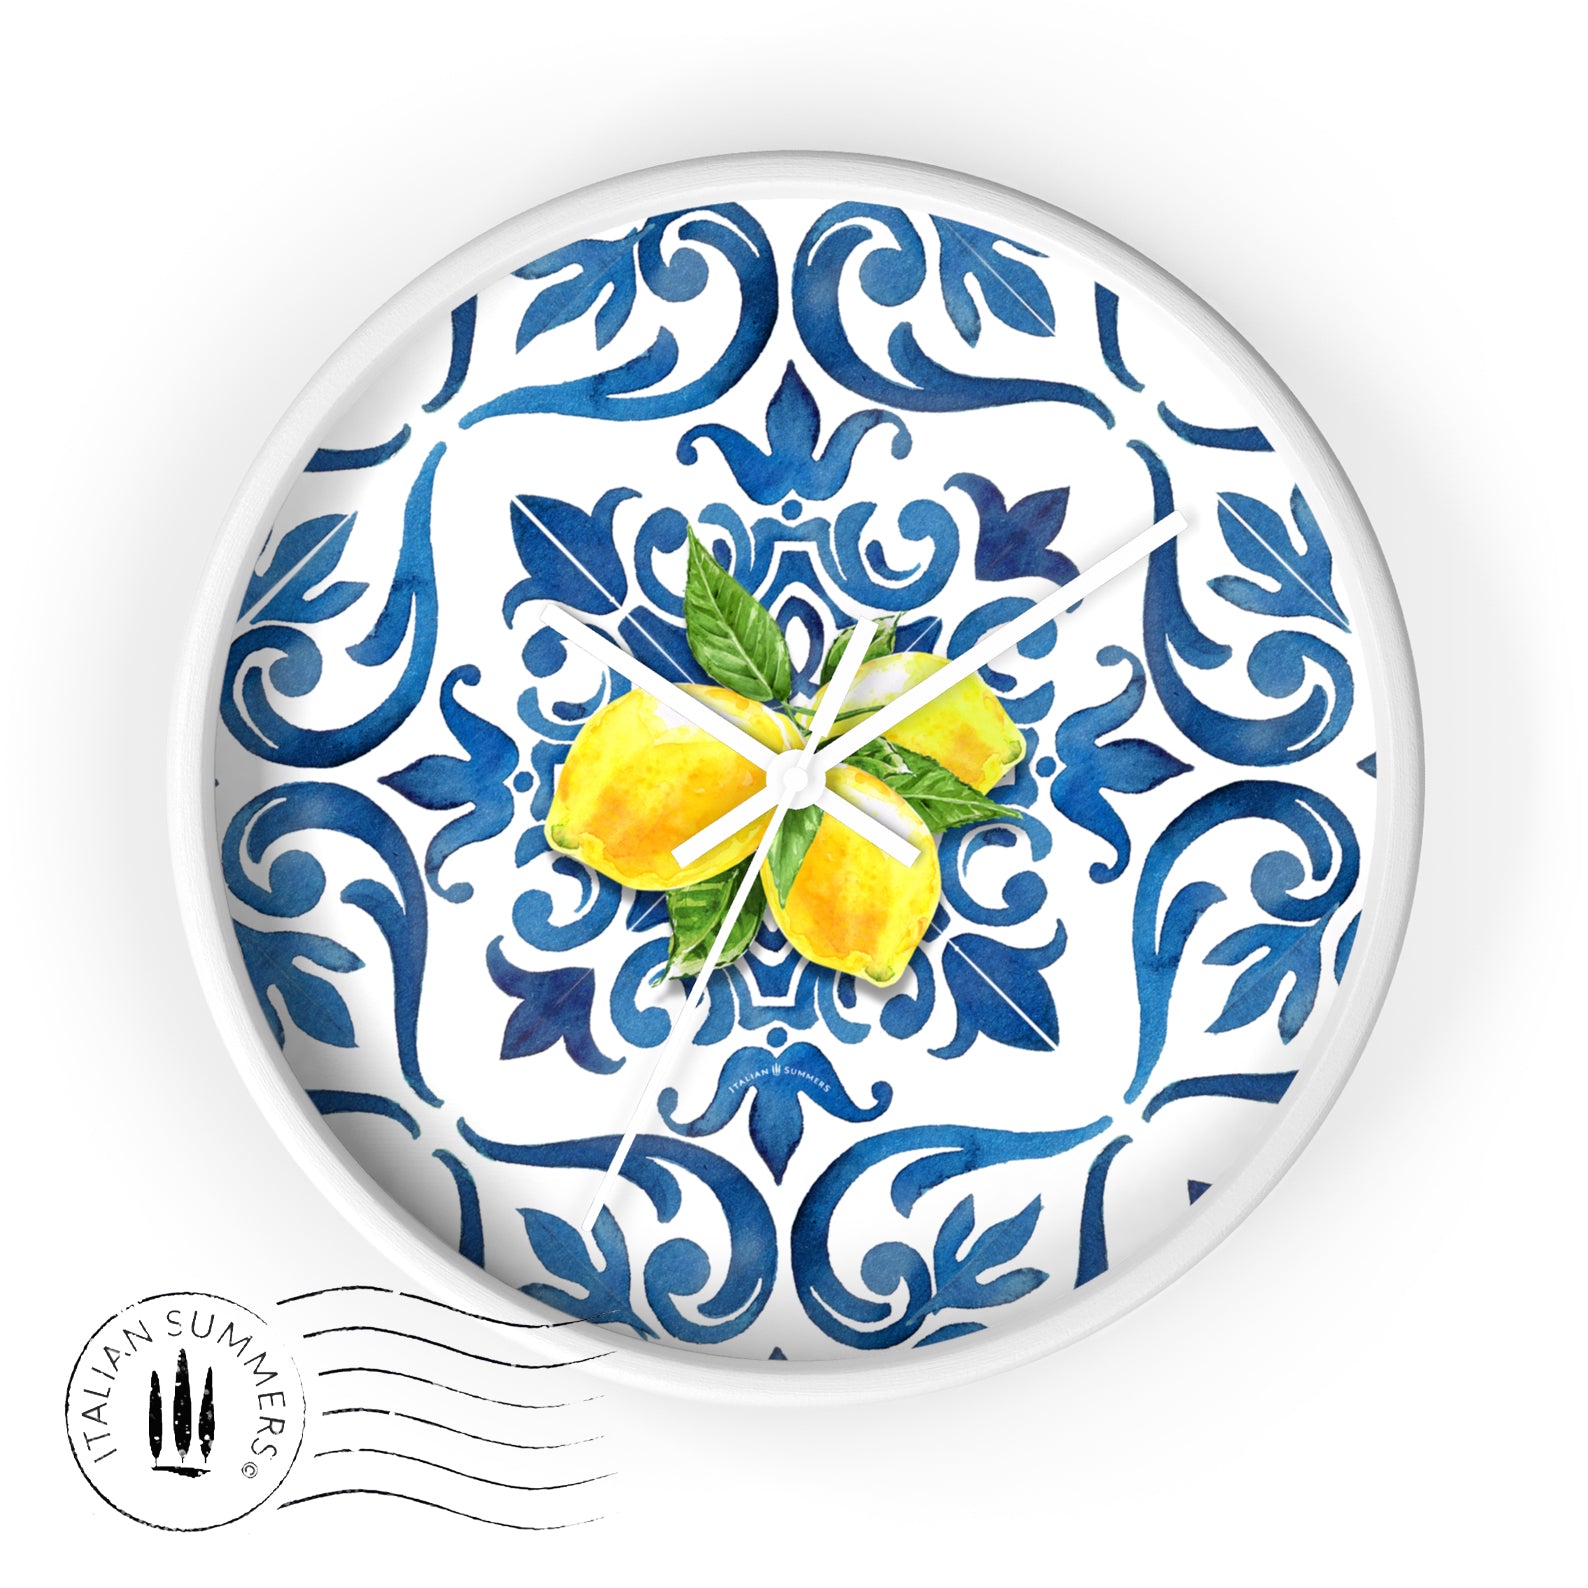  Whether you're a fan of maiolica blue tiles, Sorrento lemons, or both, this clock is sure to be the perfect addition to any room. 